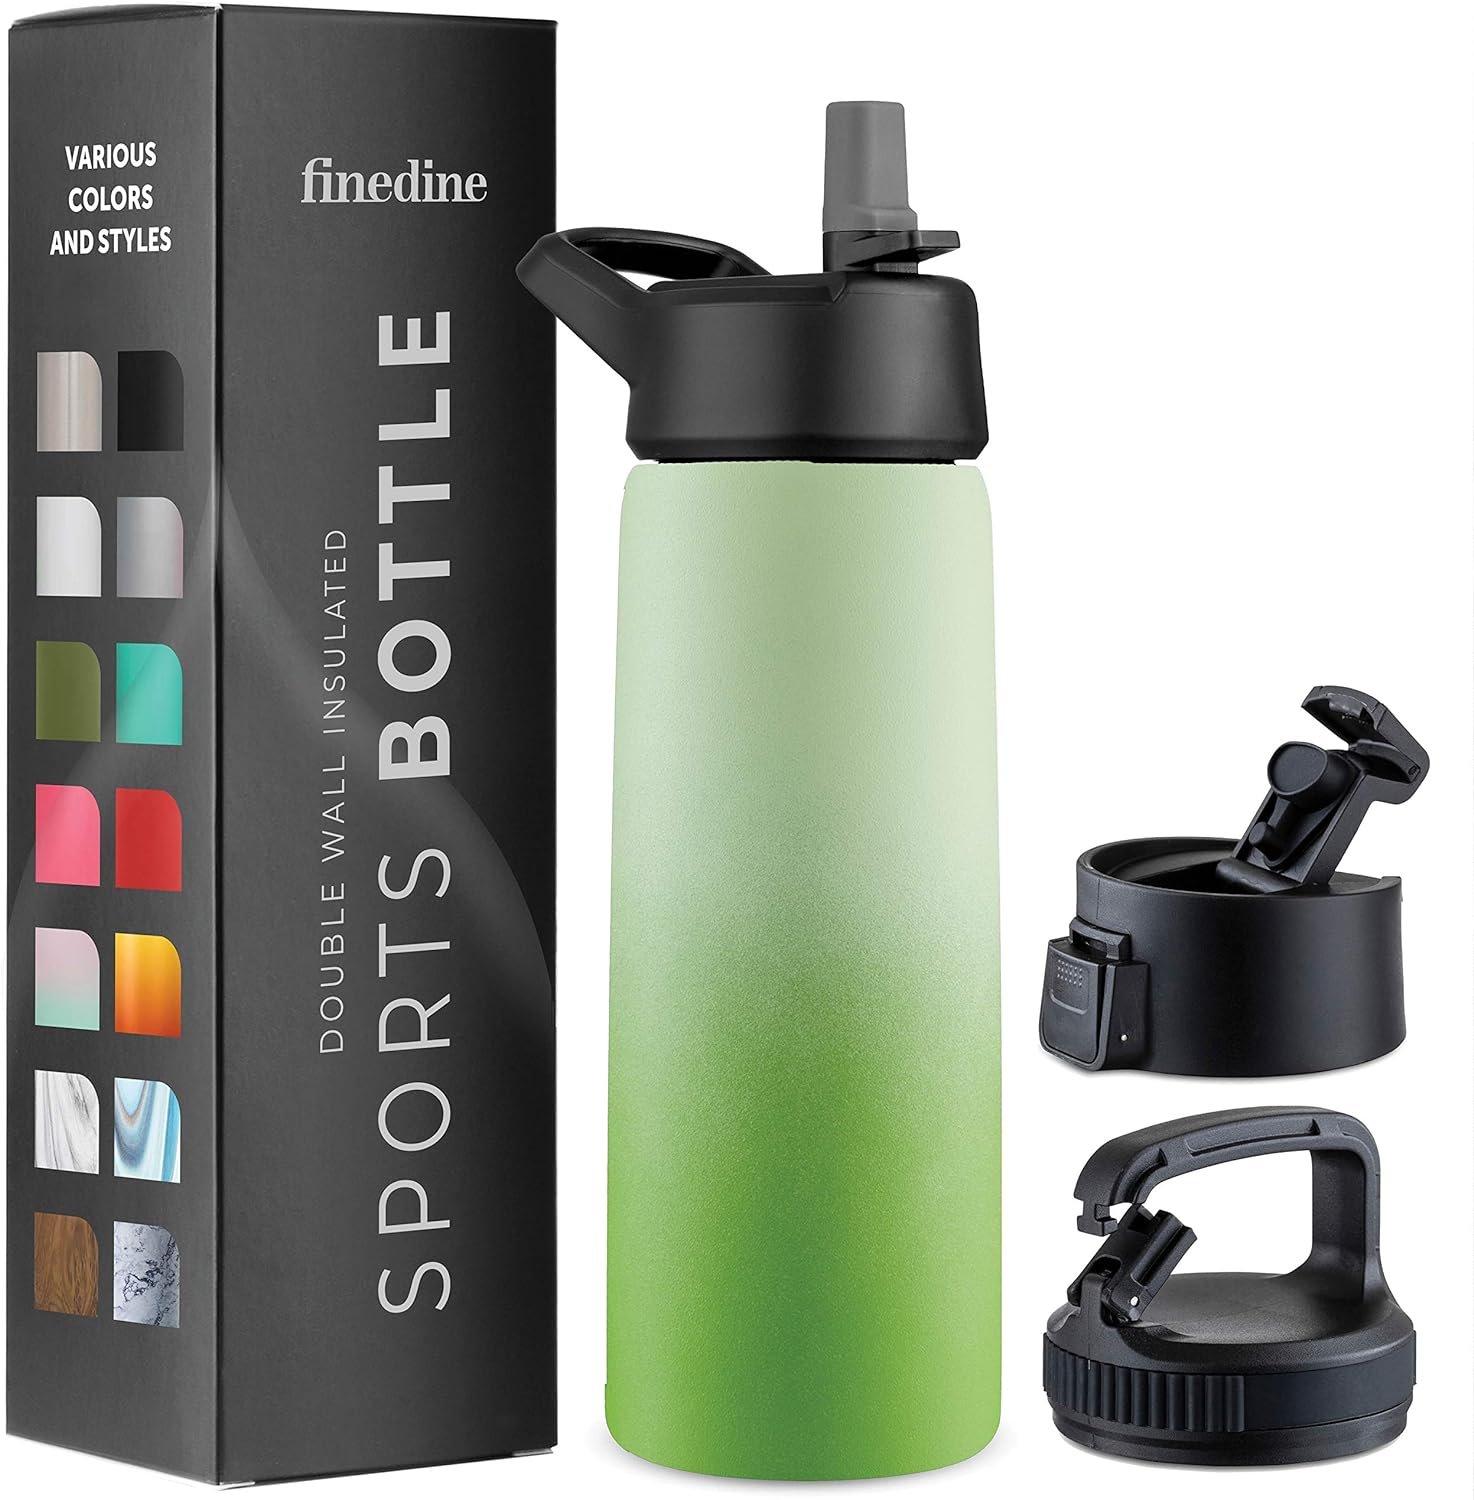 FineDine Insulated Water Bottles with Straw - 25 Oz Stainless Steel Metal Water Bottle W/ 3 Lids - Reusable for Travel, Camping, Bike, Sports - Dreamy Green